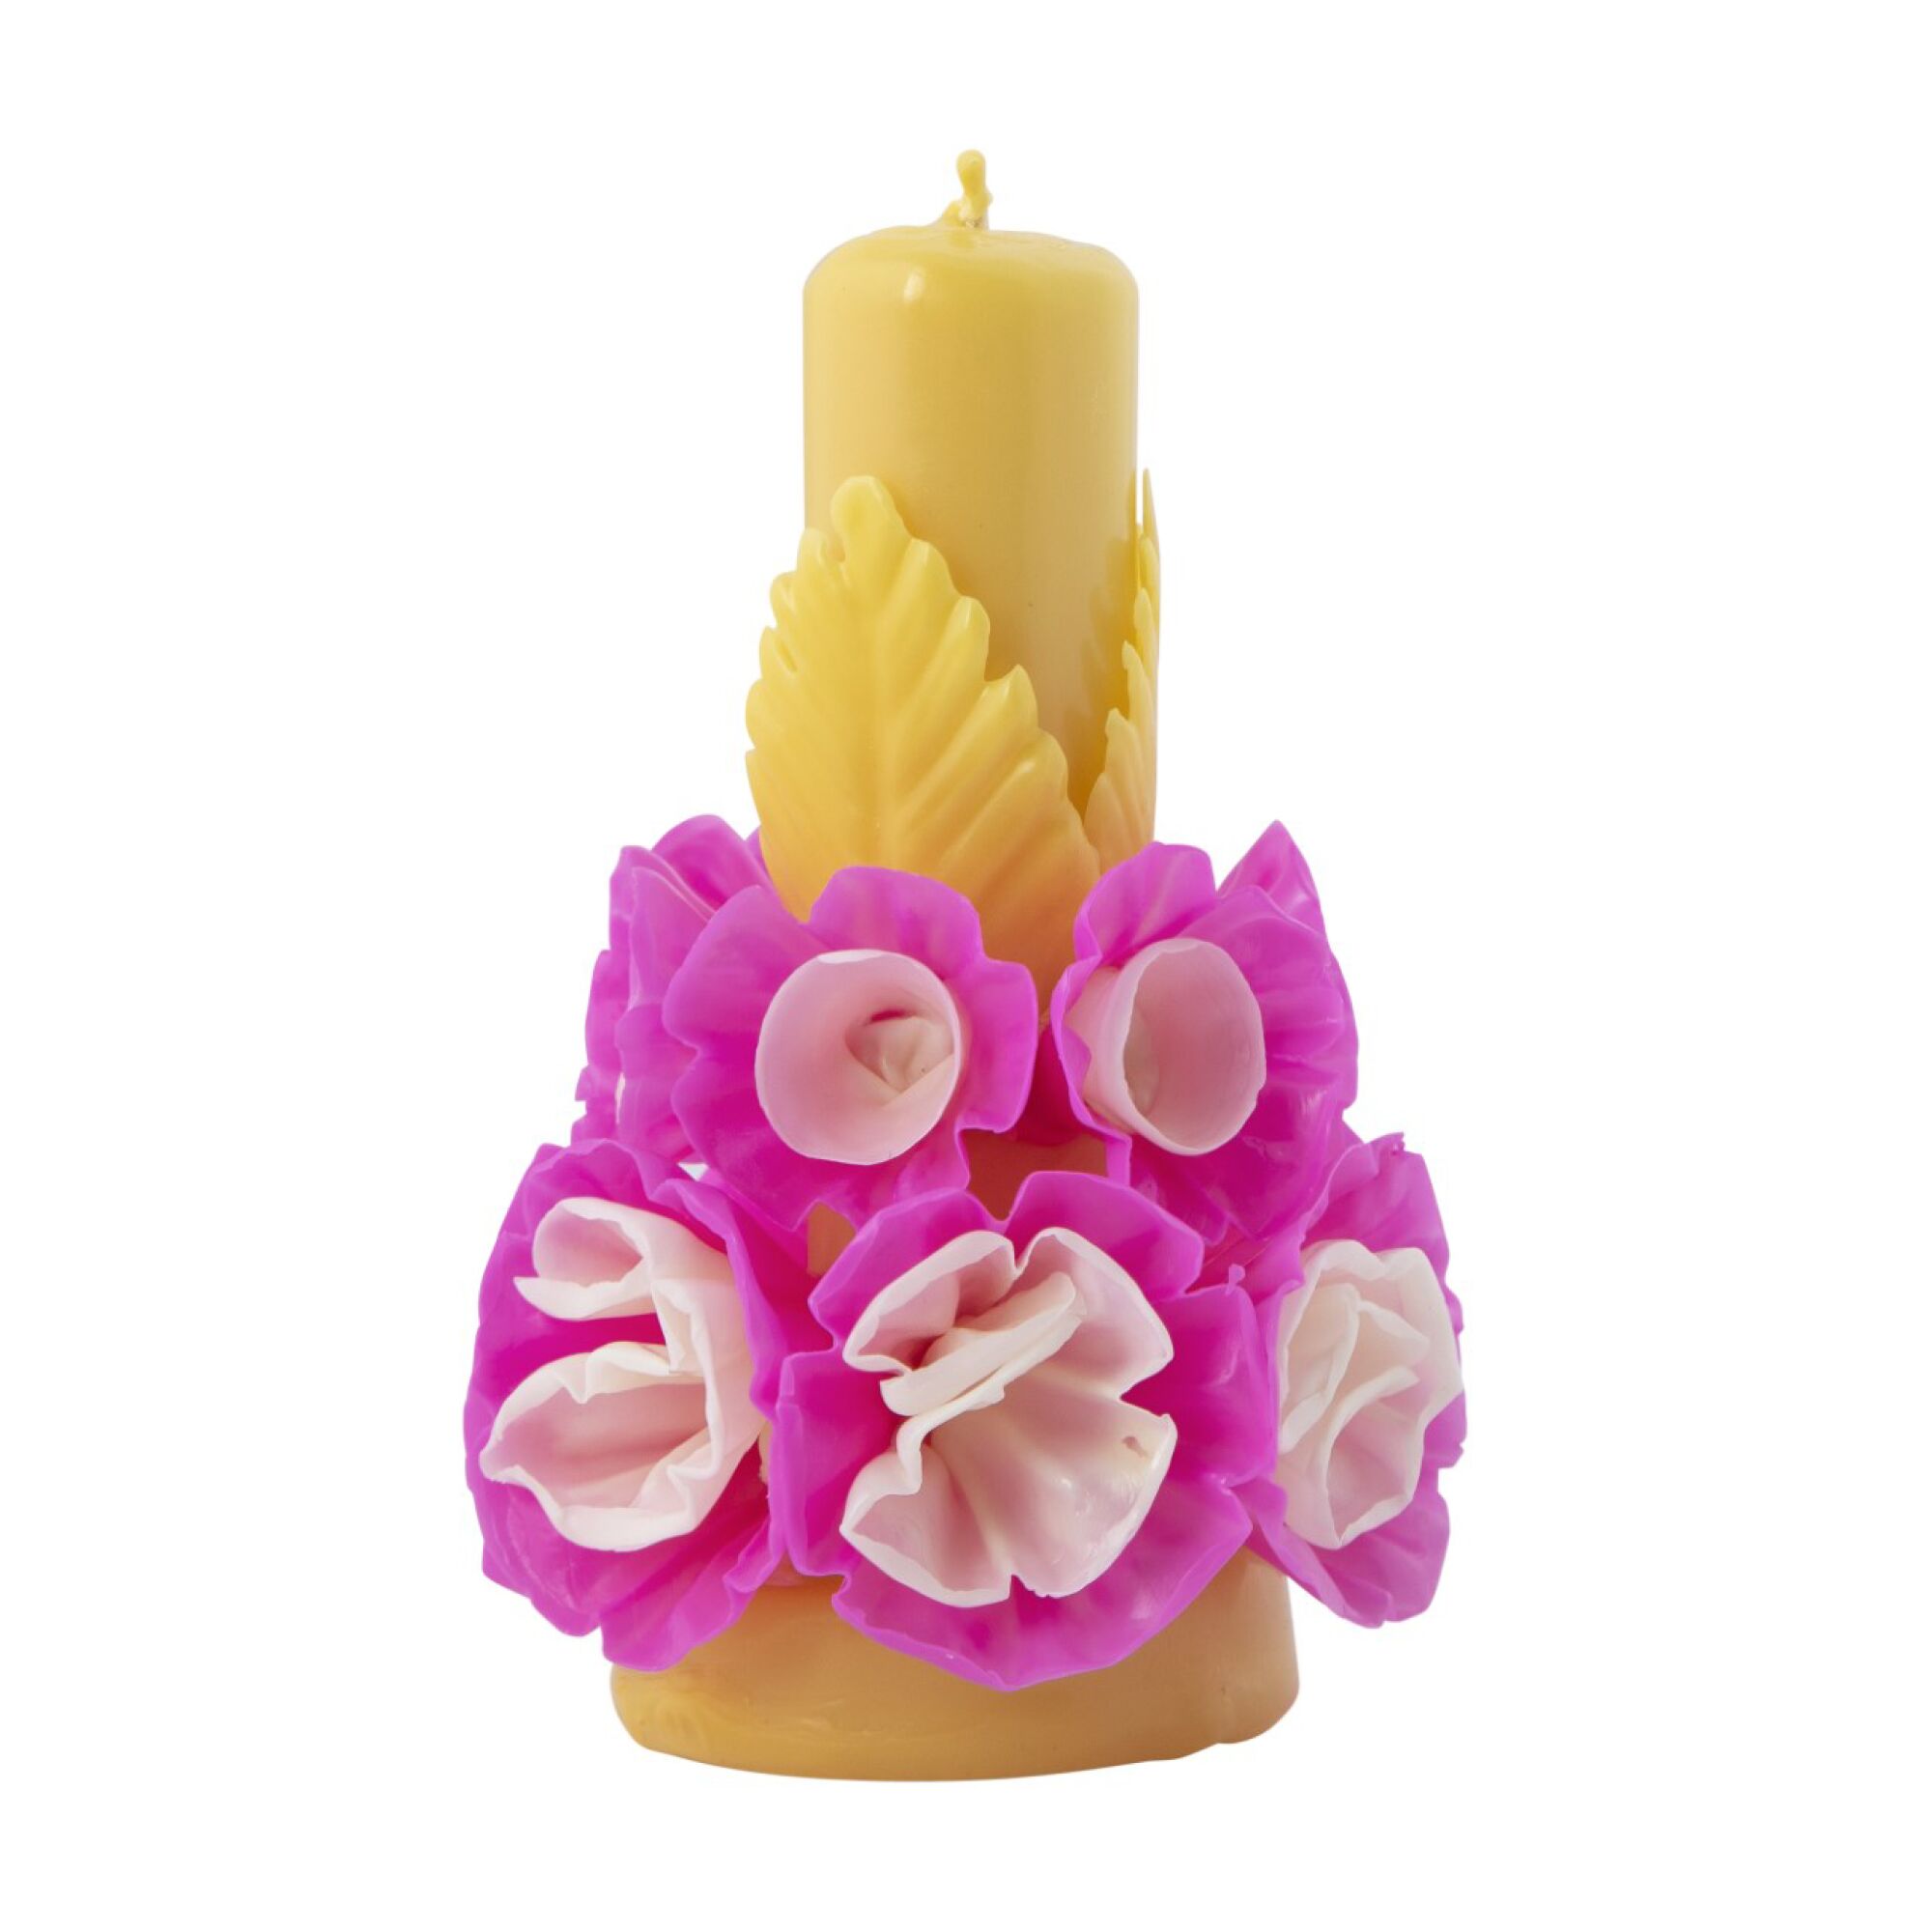 Wax floral candles from Kneeland Co. Rarities